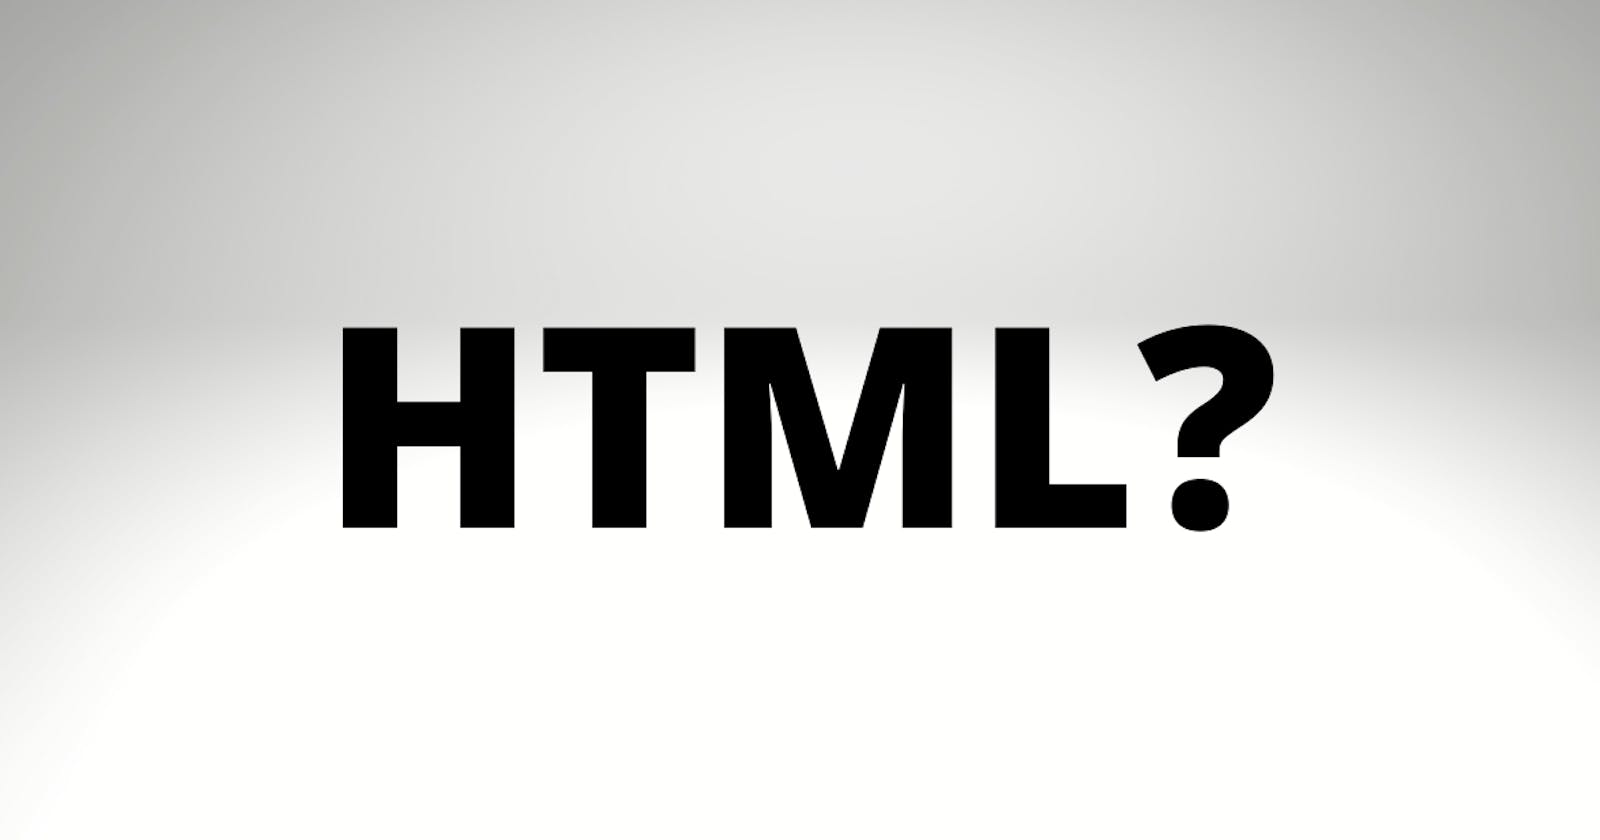 What is HTML? 🤔